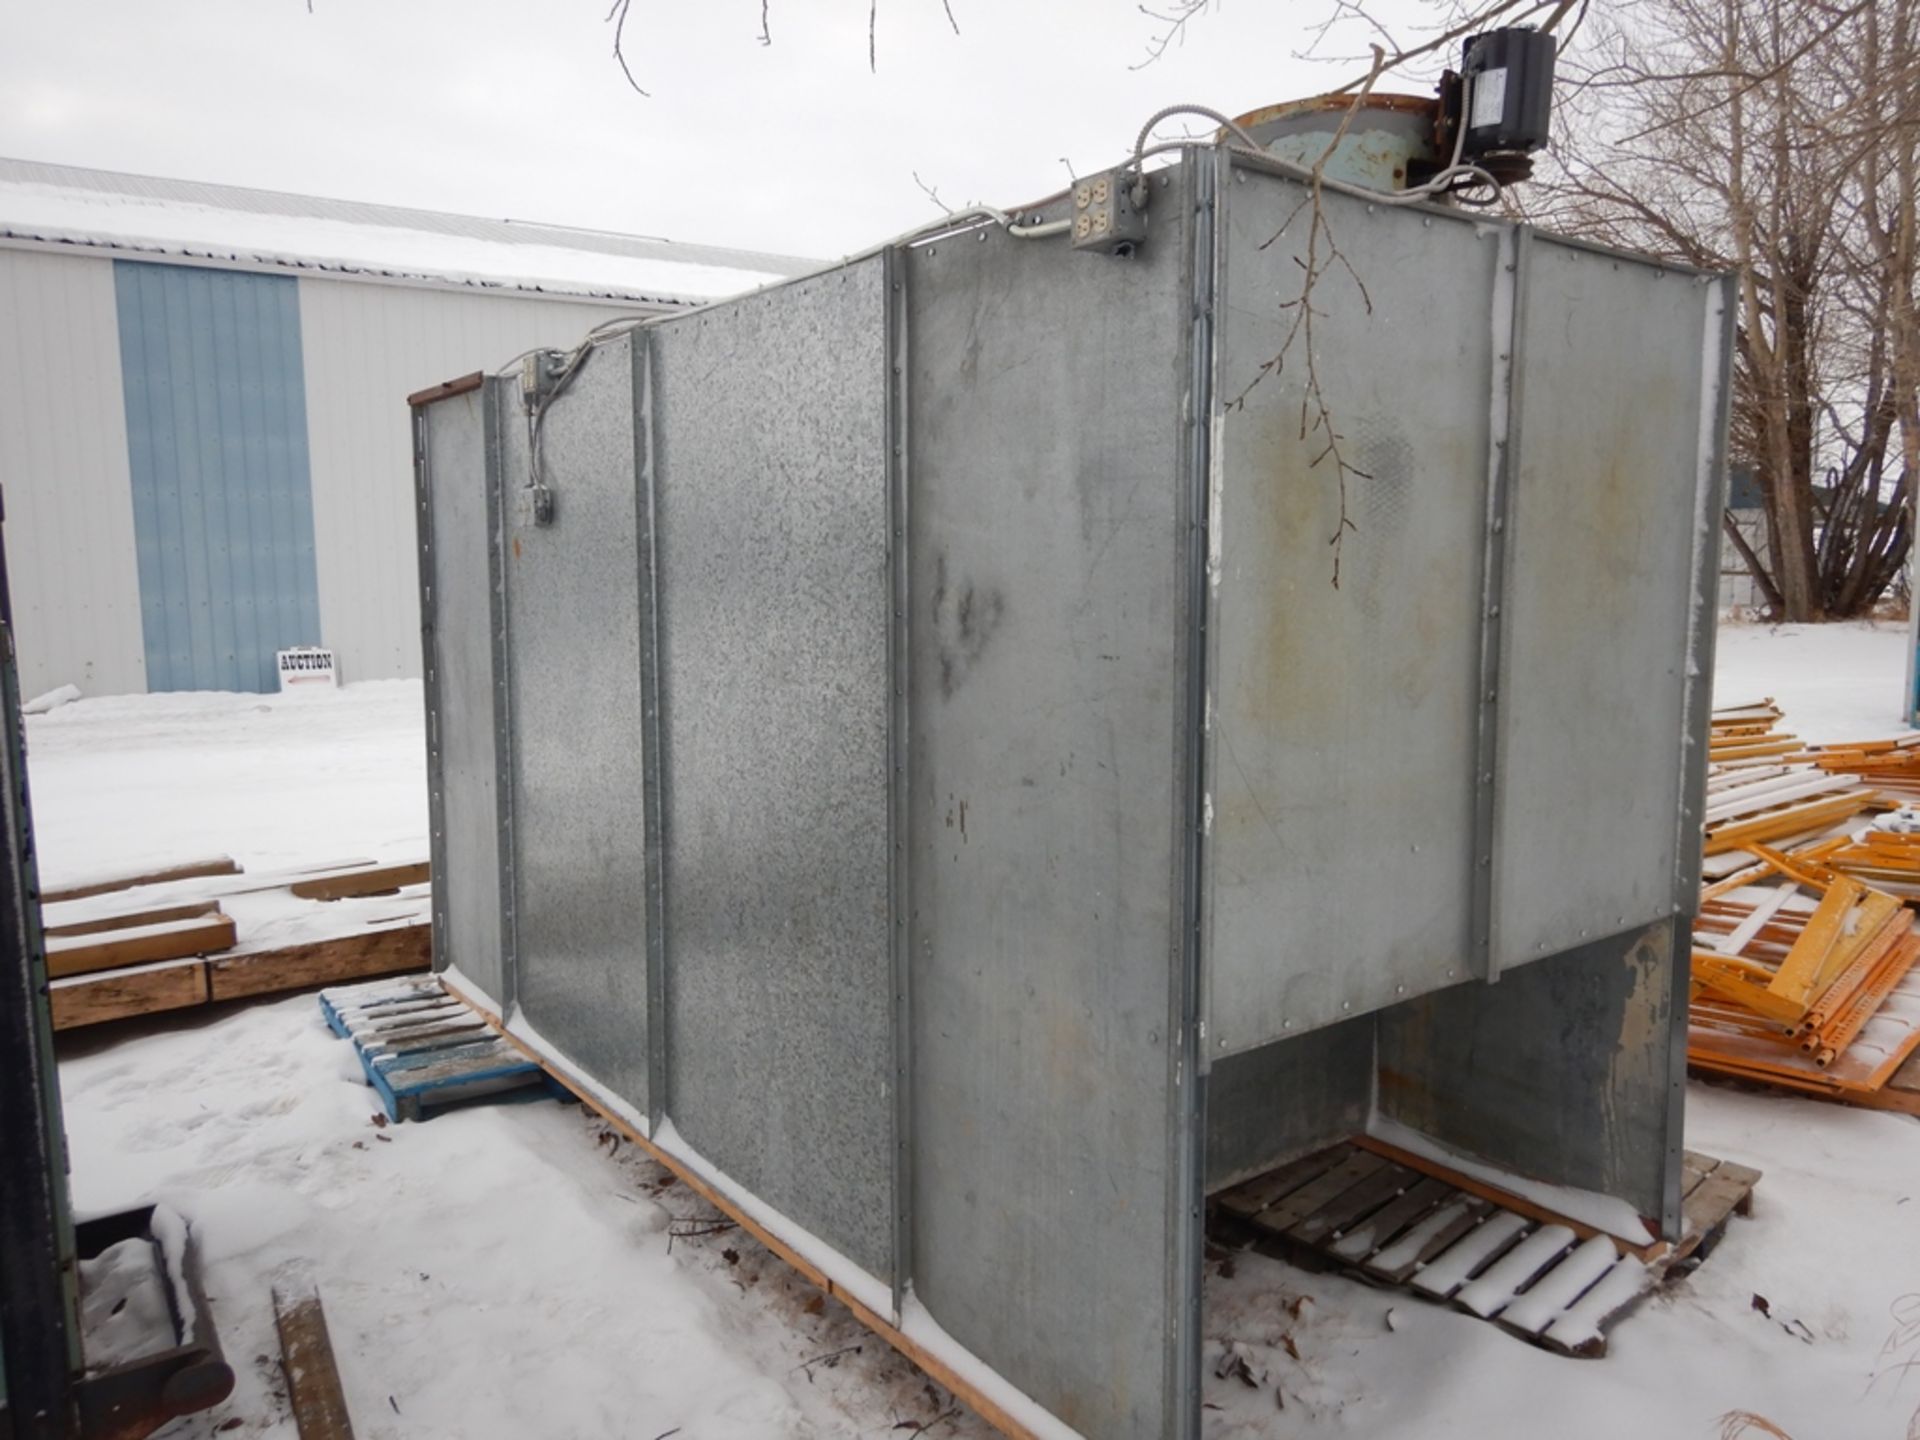 GALVANIZED INDUSTRIAL SPRAY BOOTH, 60"WX12.5'lX 82"H - Image 2 of 2